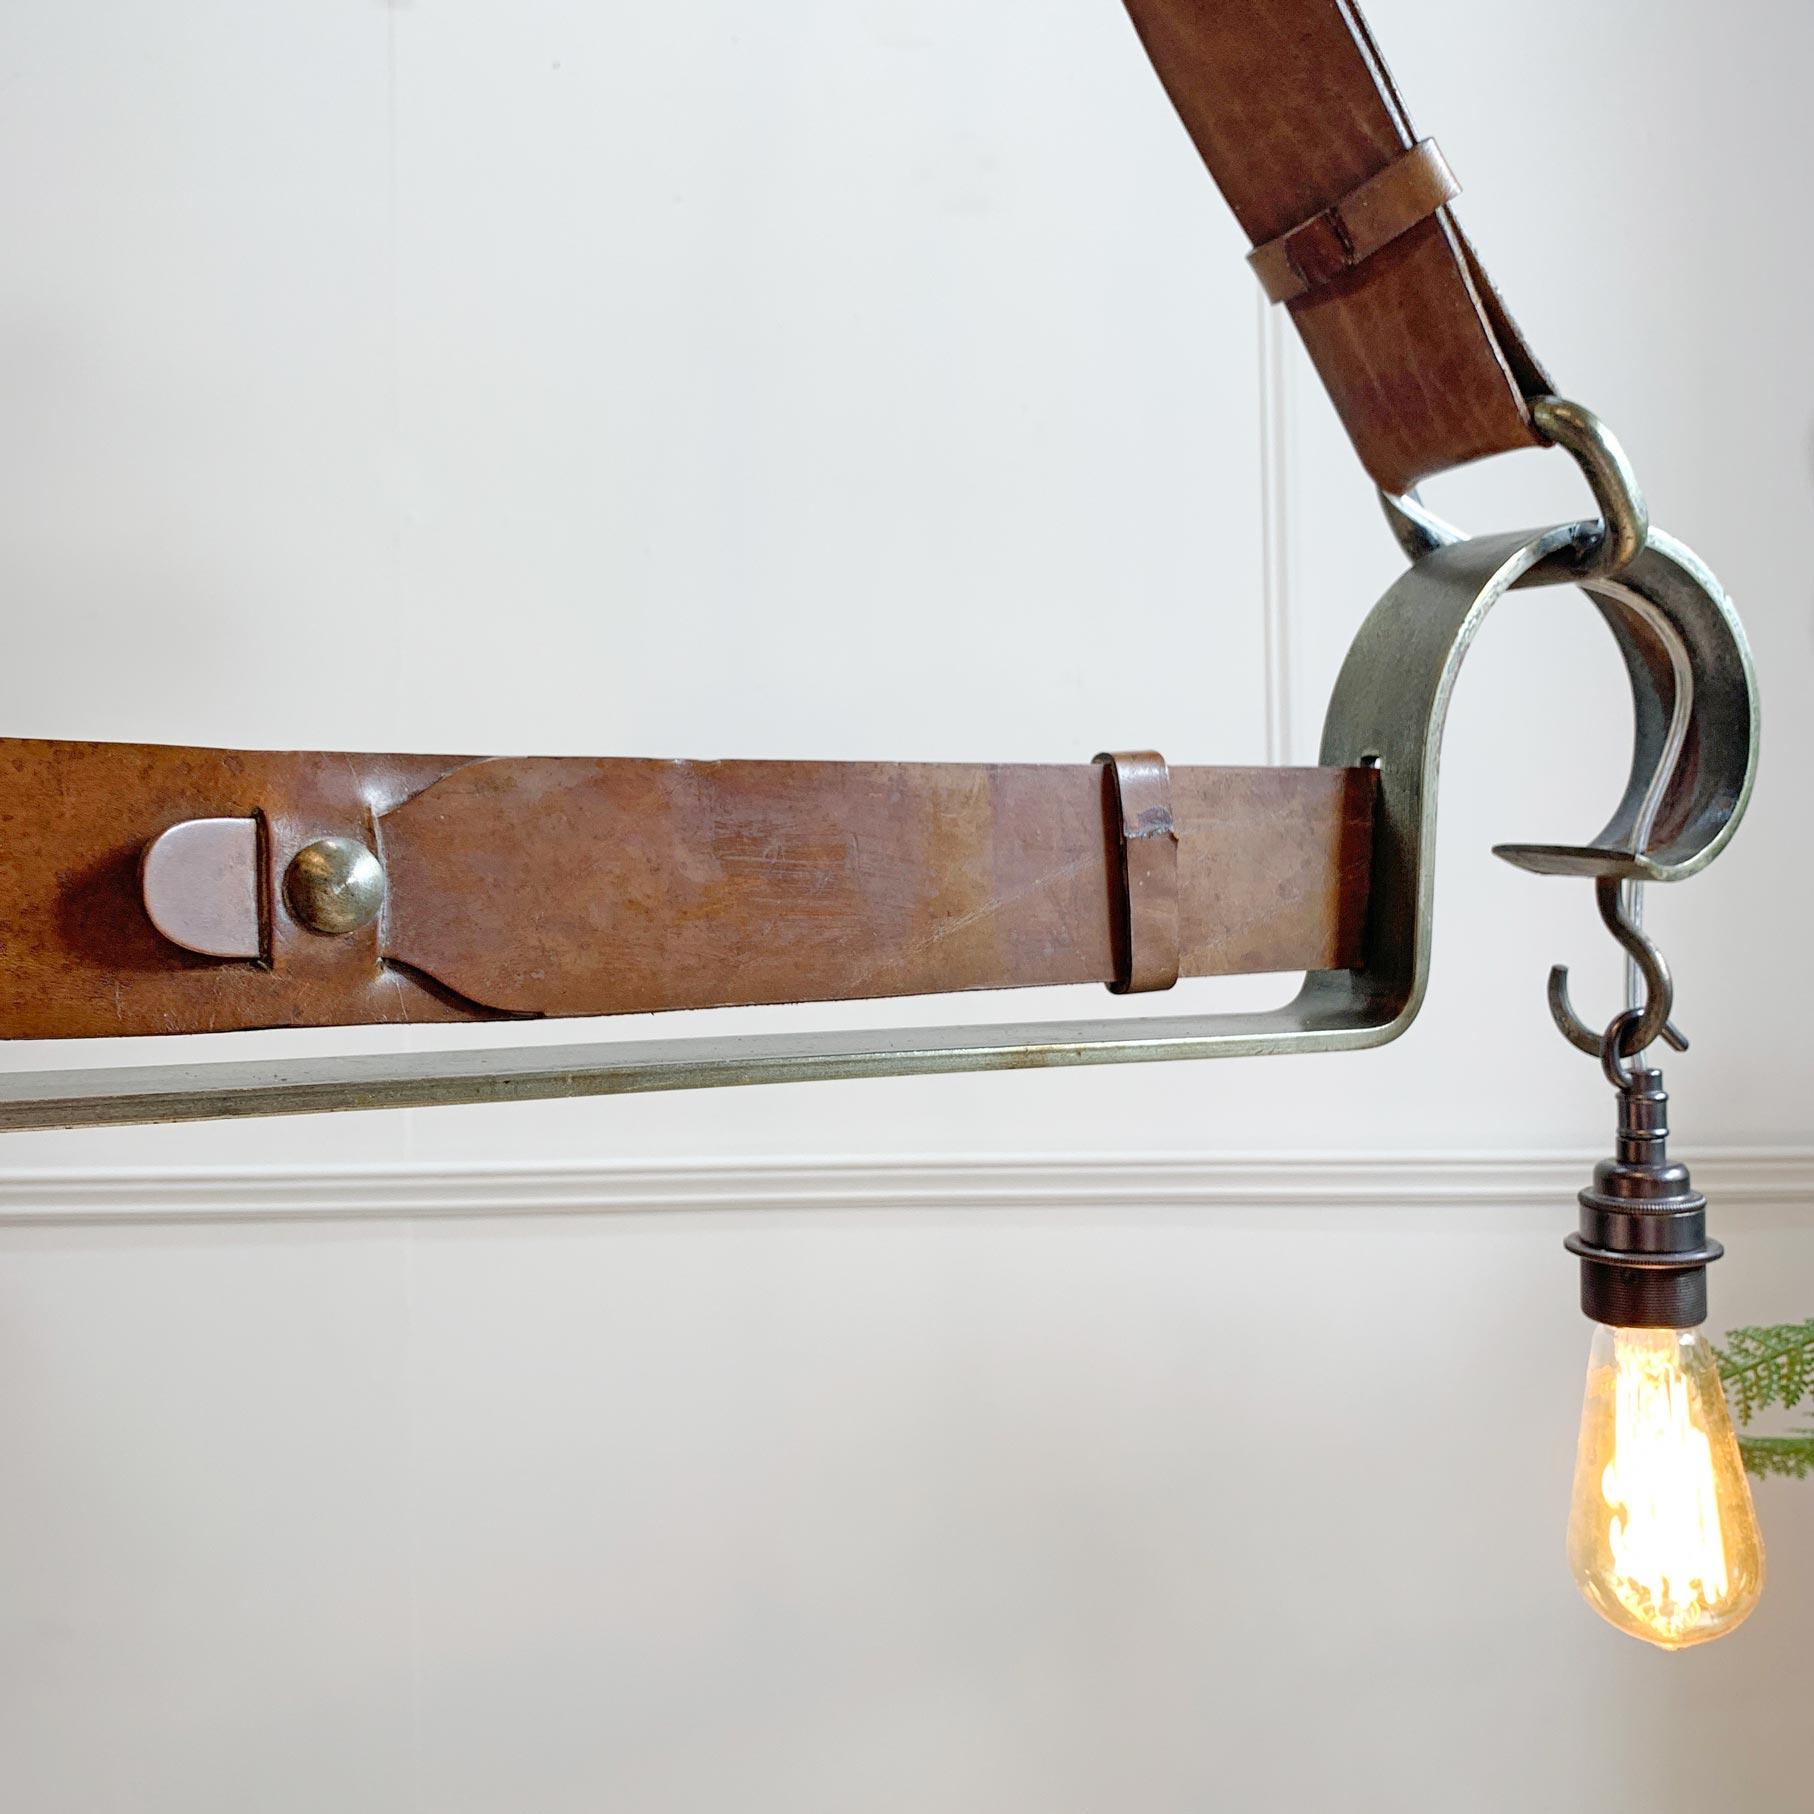 Jean-Pierre Ryckaert Tan Leather Strap and Steel Ceiling Pendant Light For Sale 2